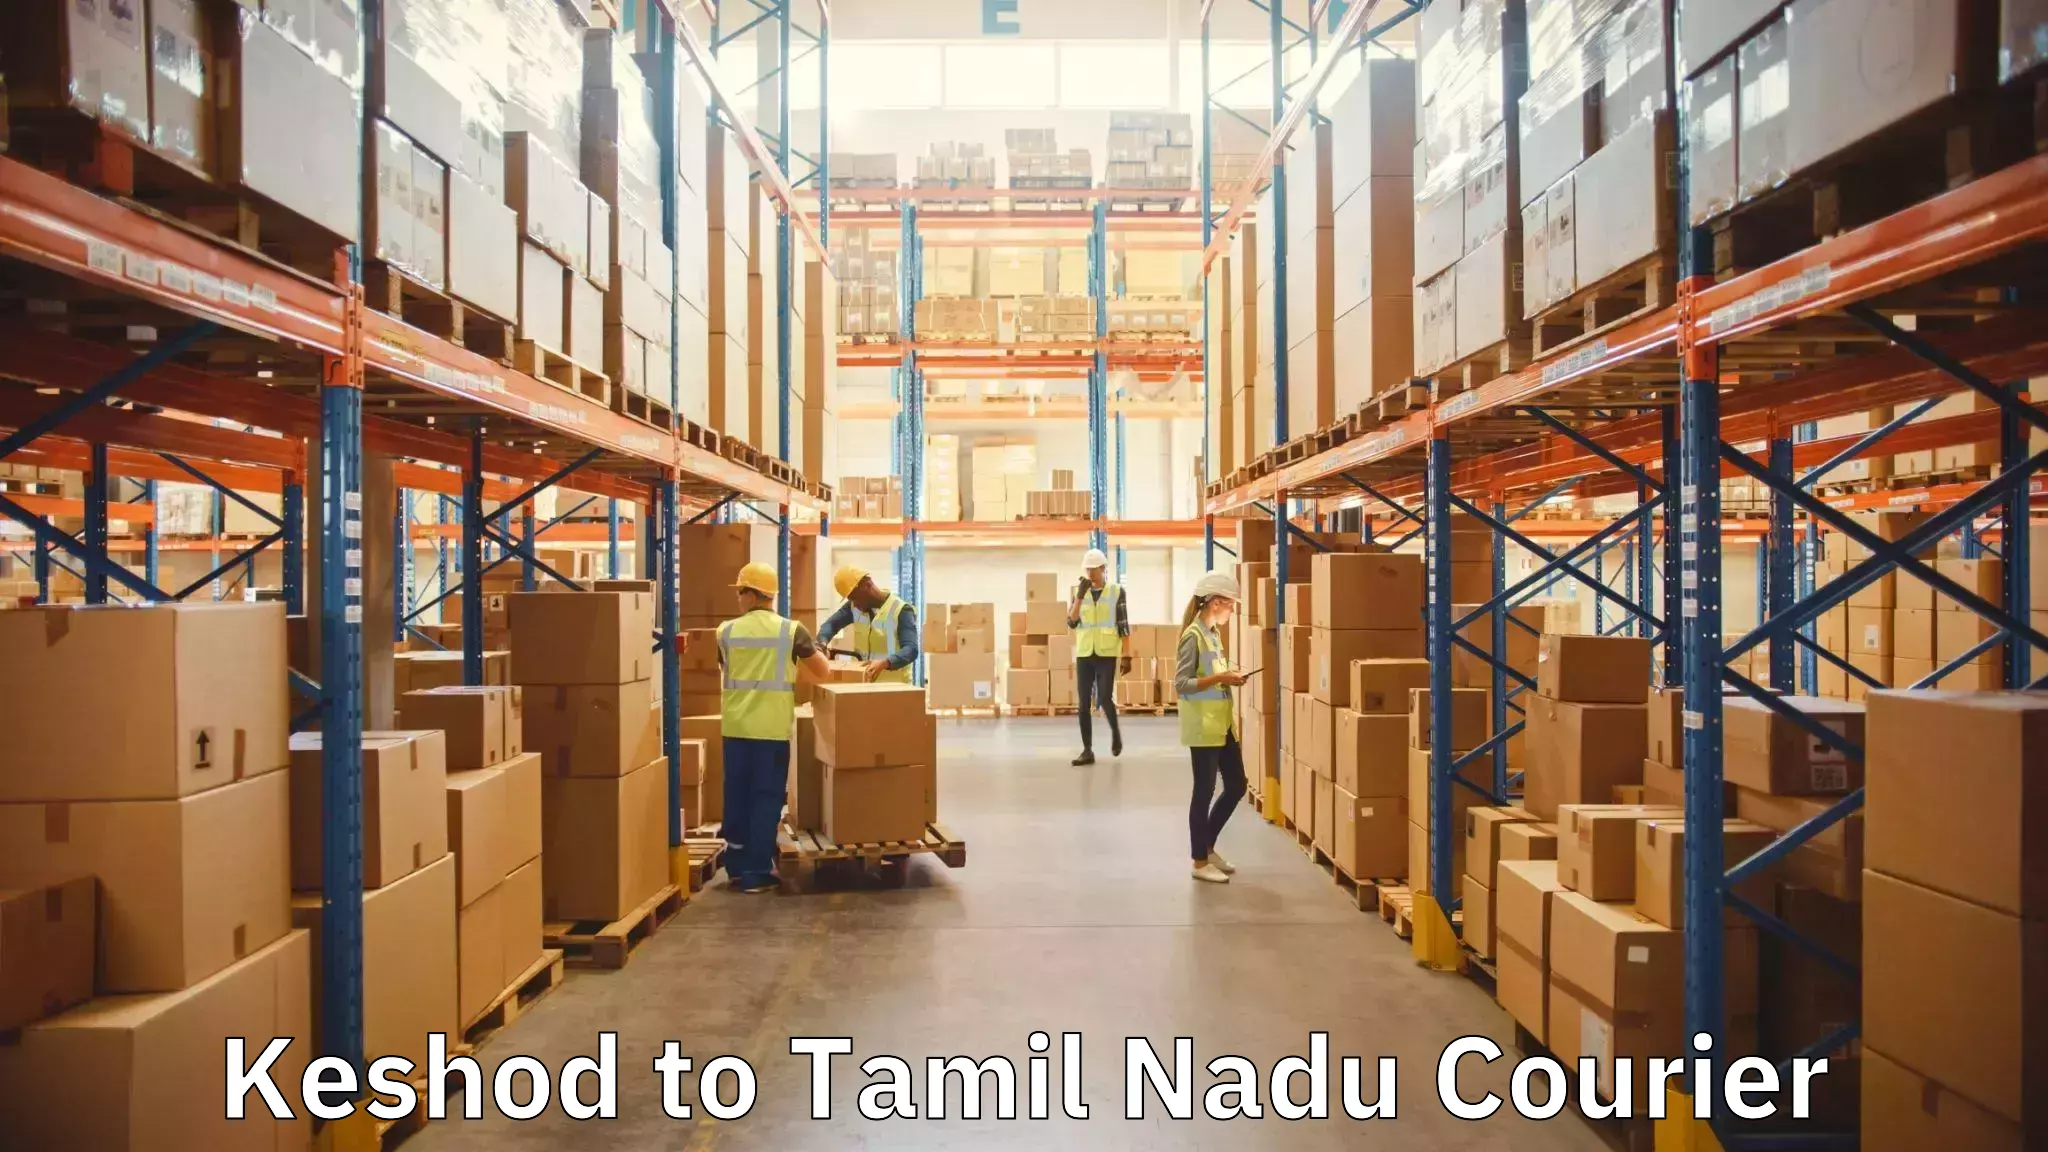 Furniture delivery service Keshod to Chennai Port